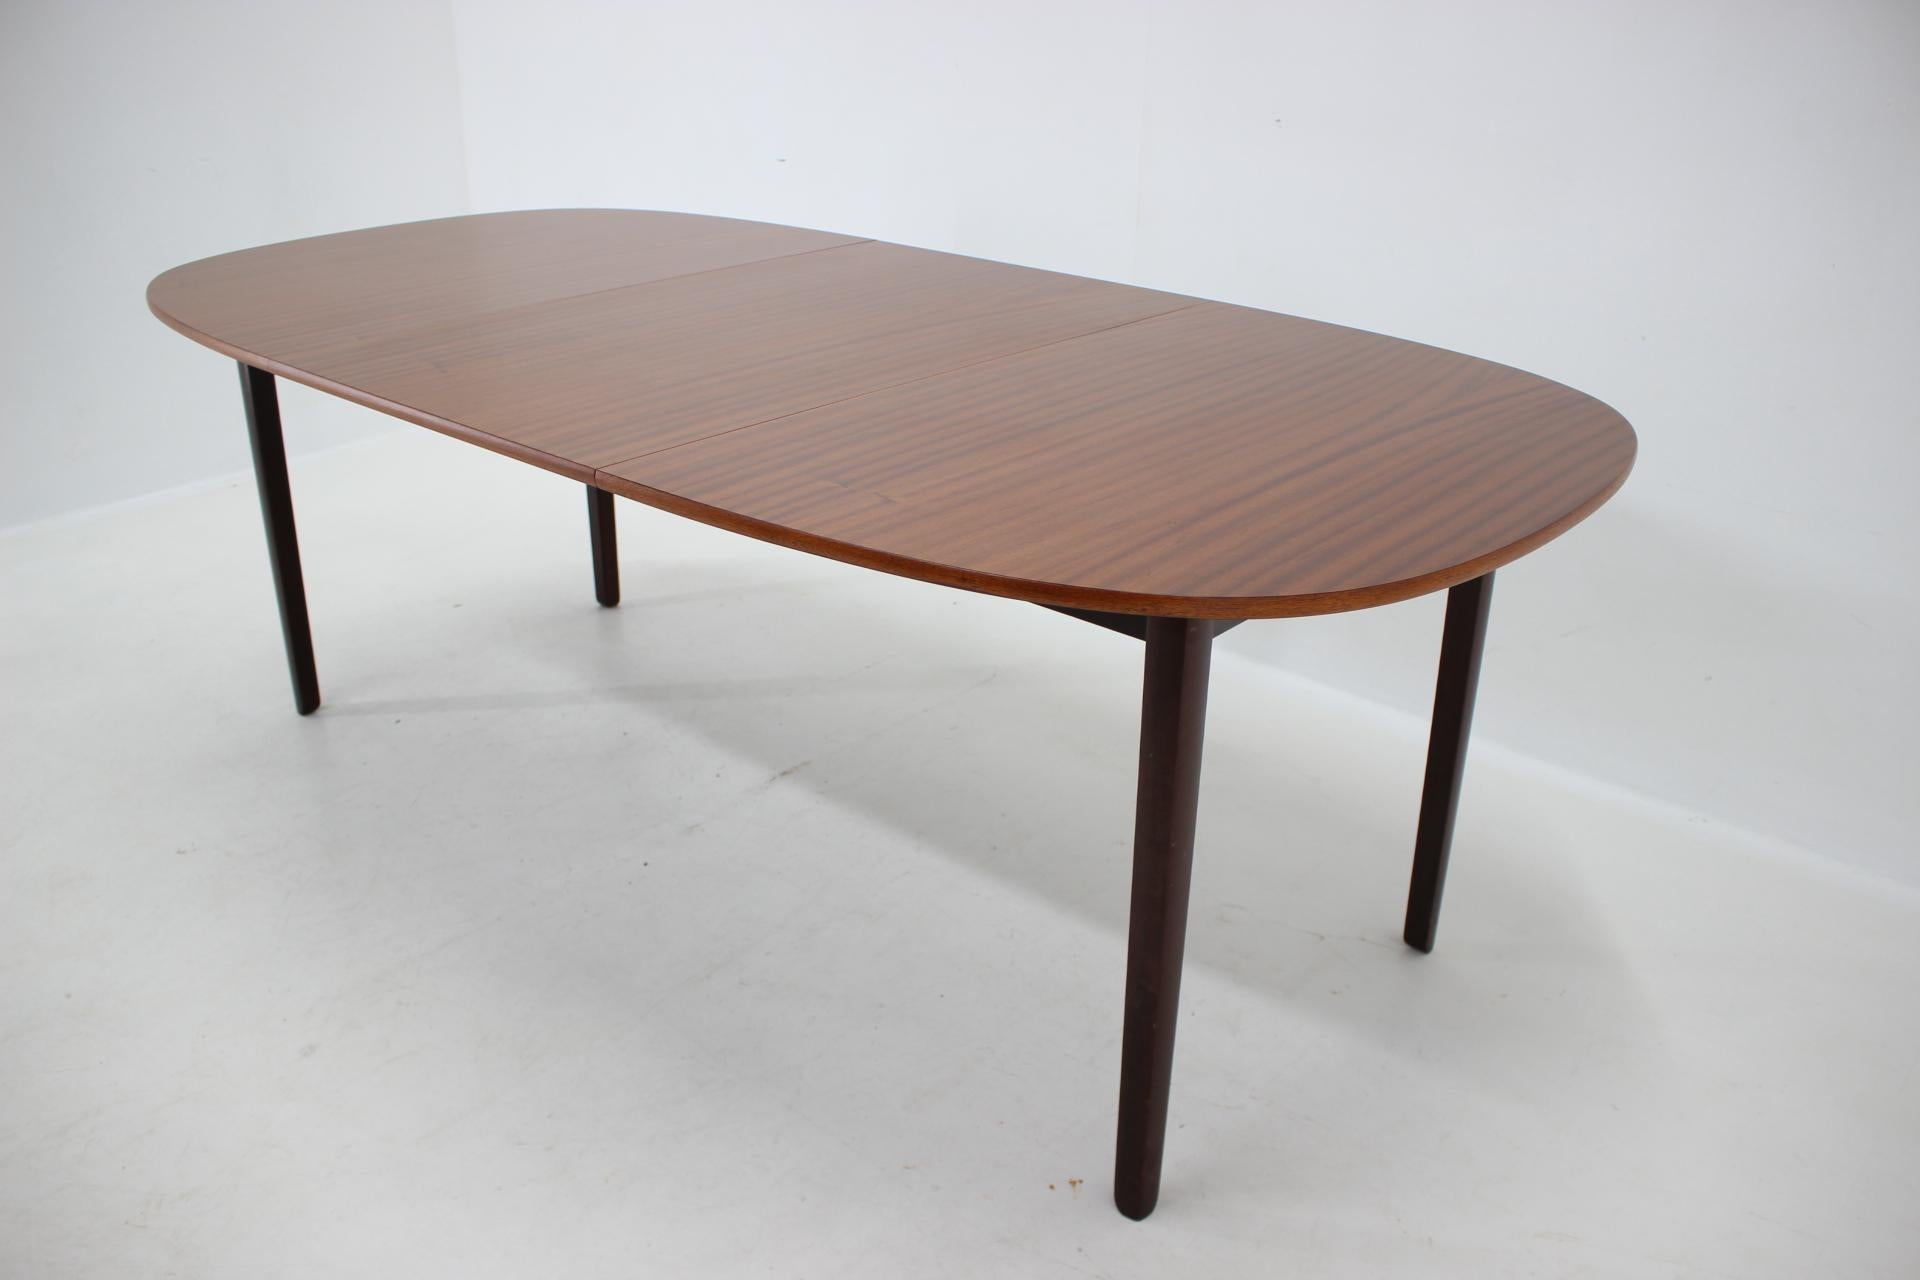 Wood 1960s Ole Wanscher Extendable Mahogany Dining Table by P. Jeppesen For Sale